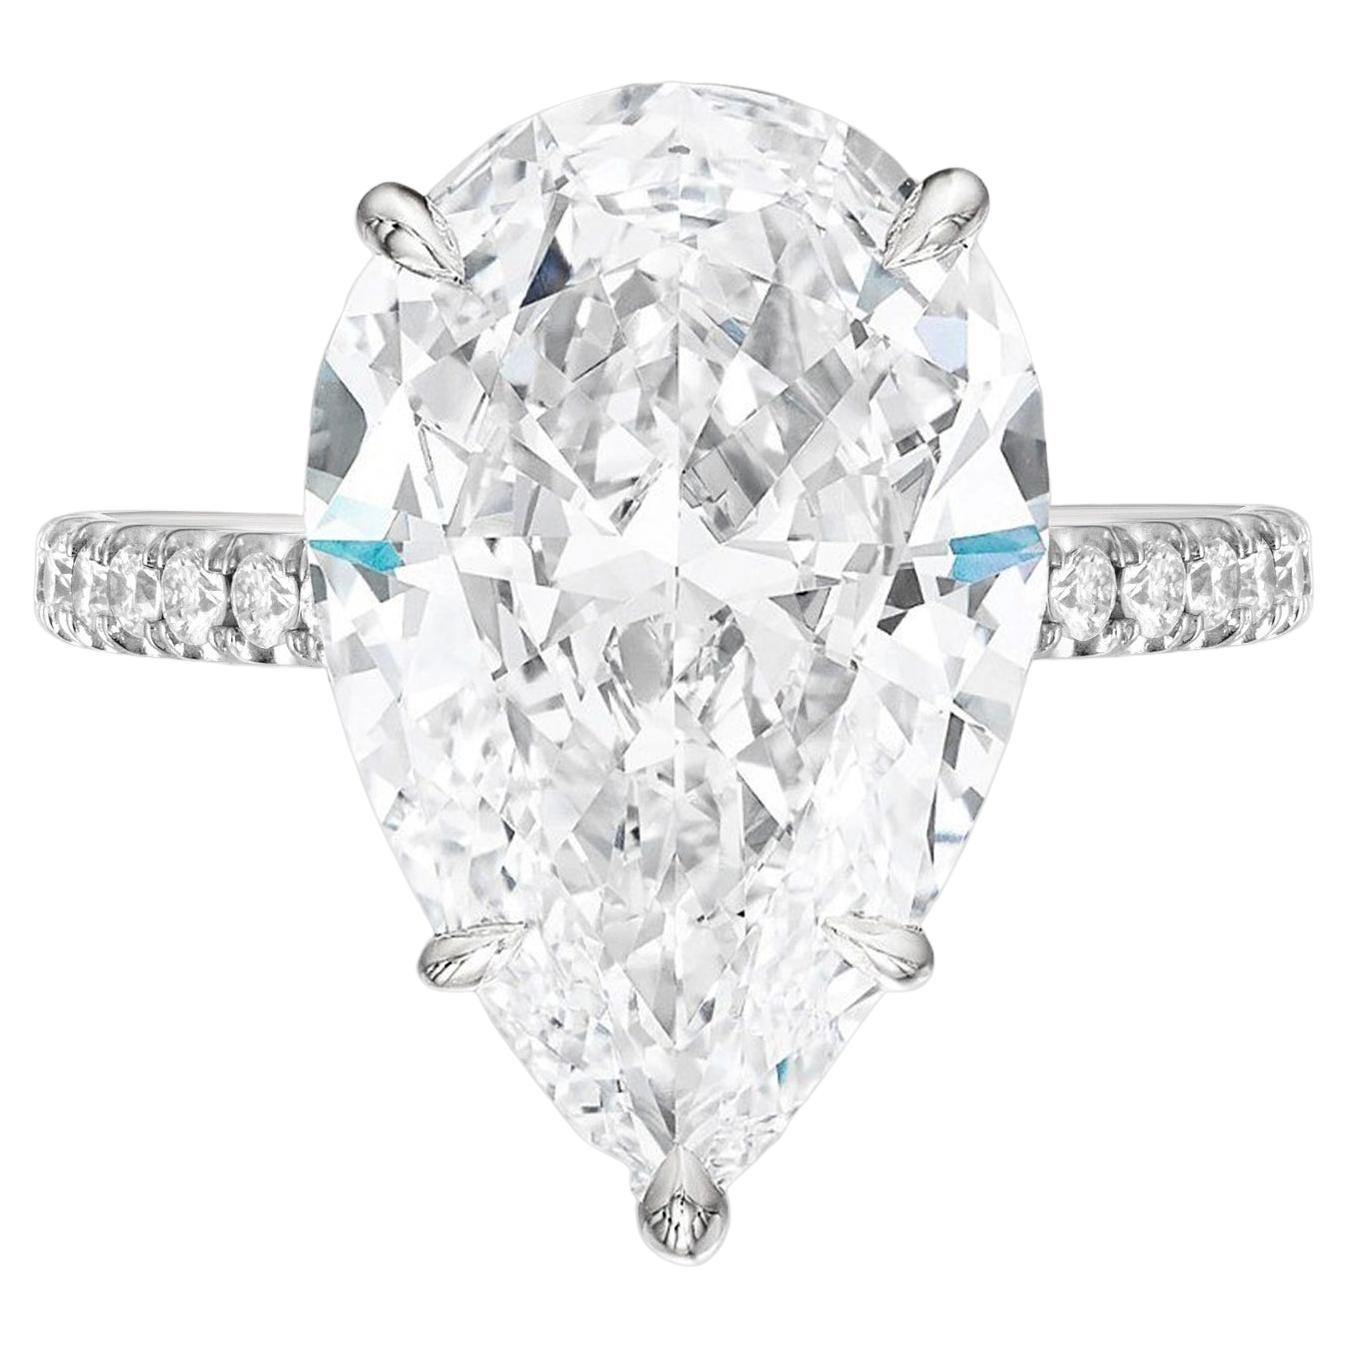 Exceptional Flawless GIA Certified 6 Carat Pear Cut Solitaire Diamond Ring